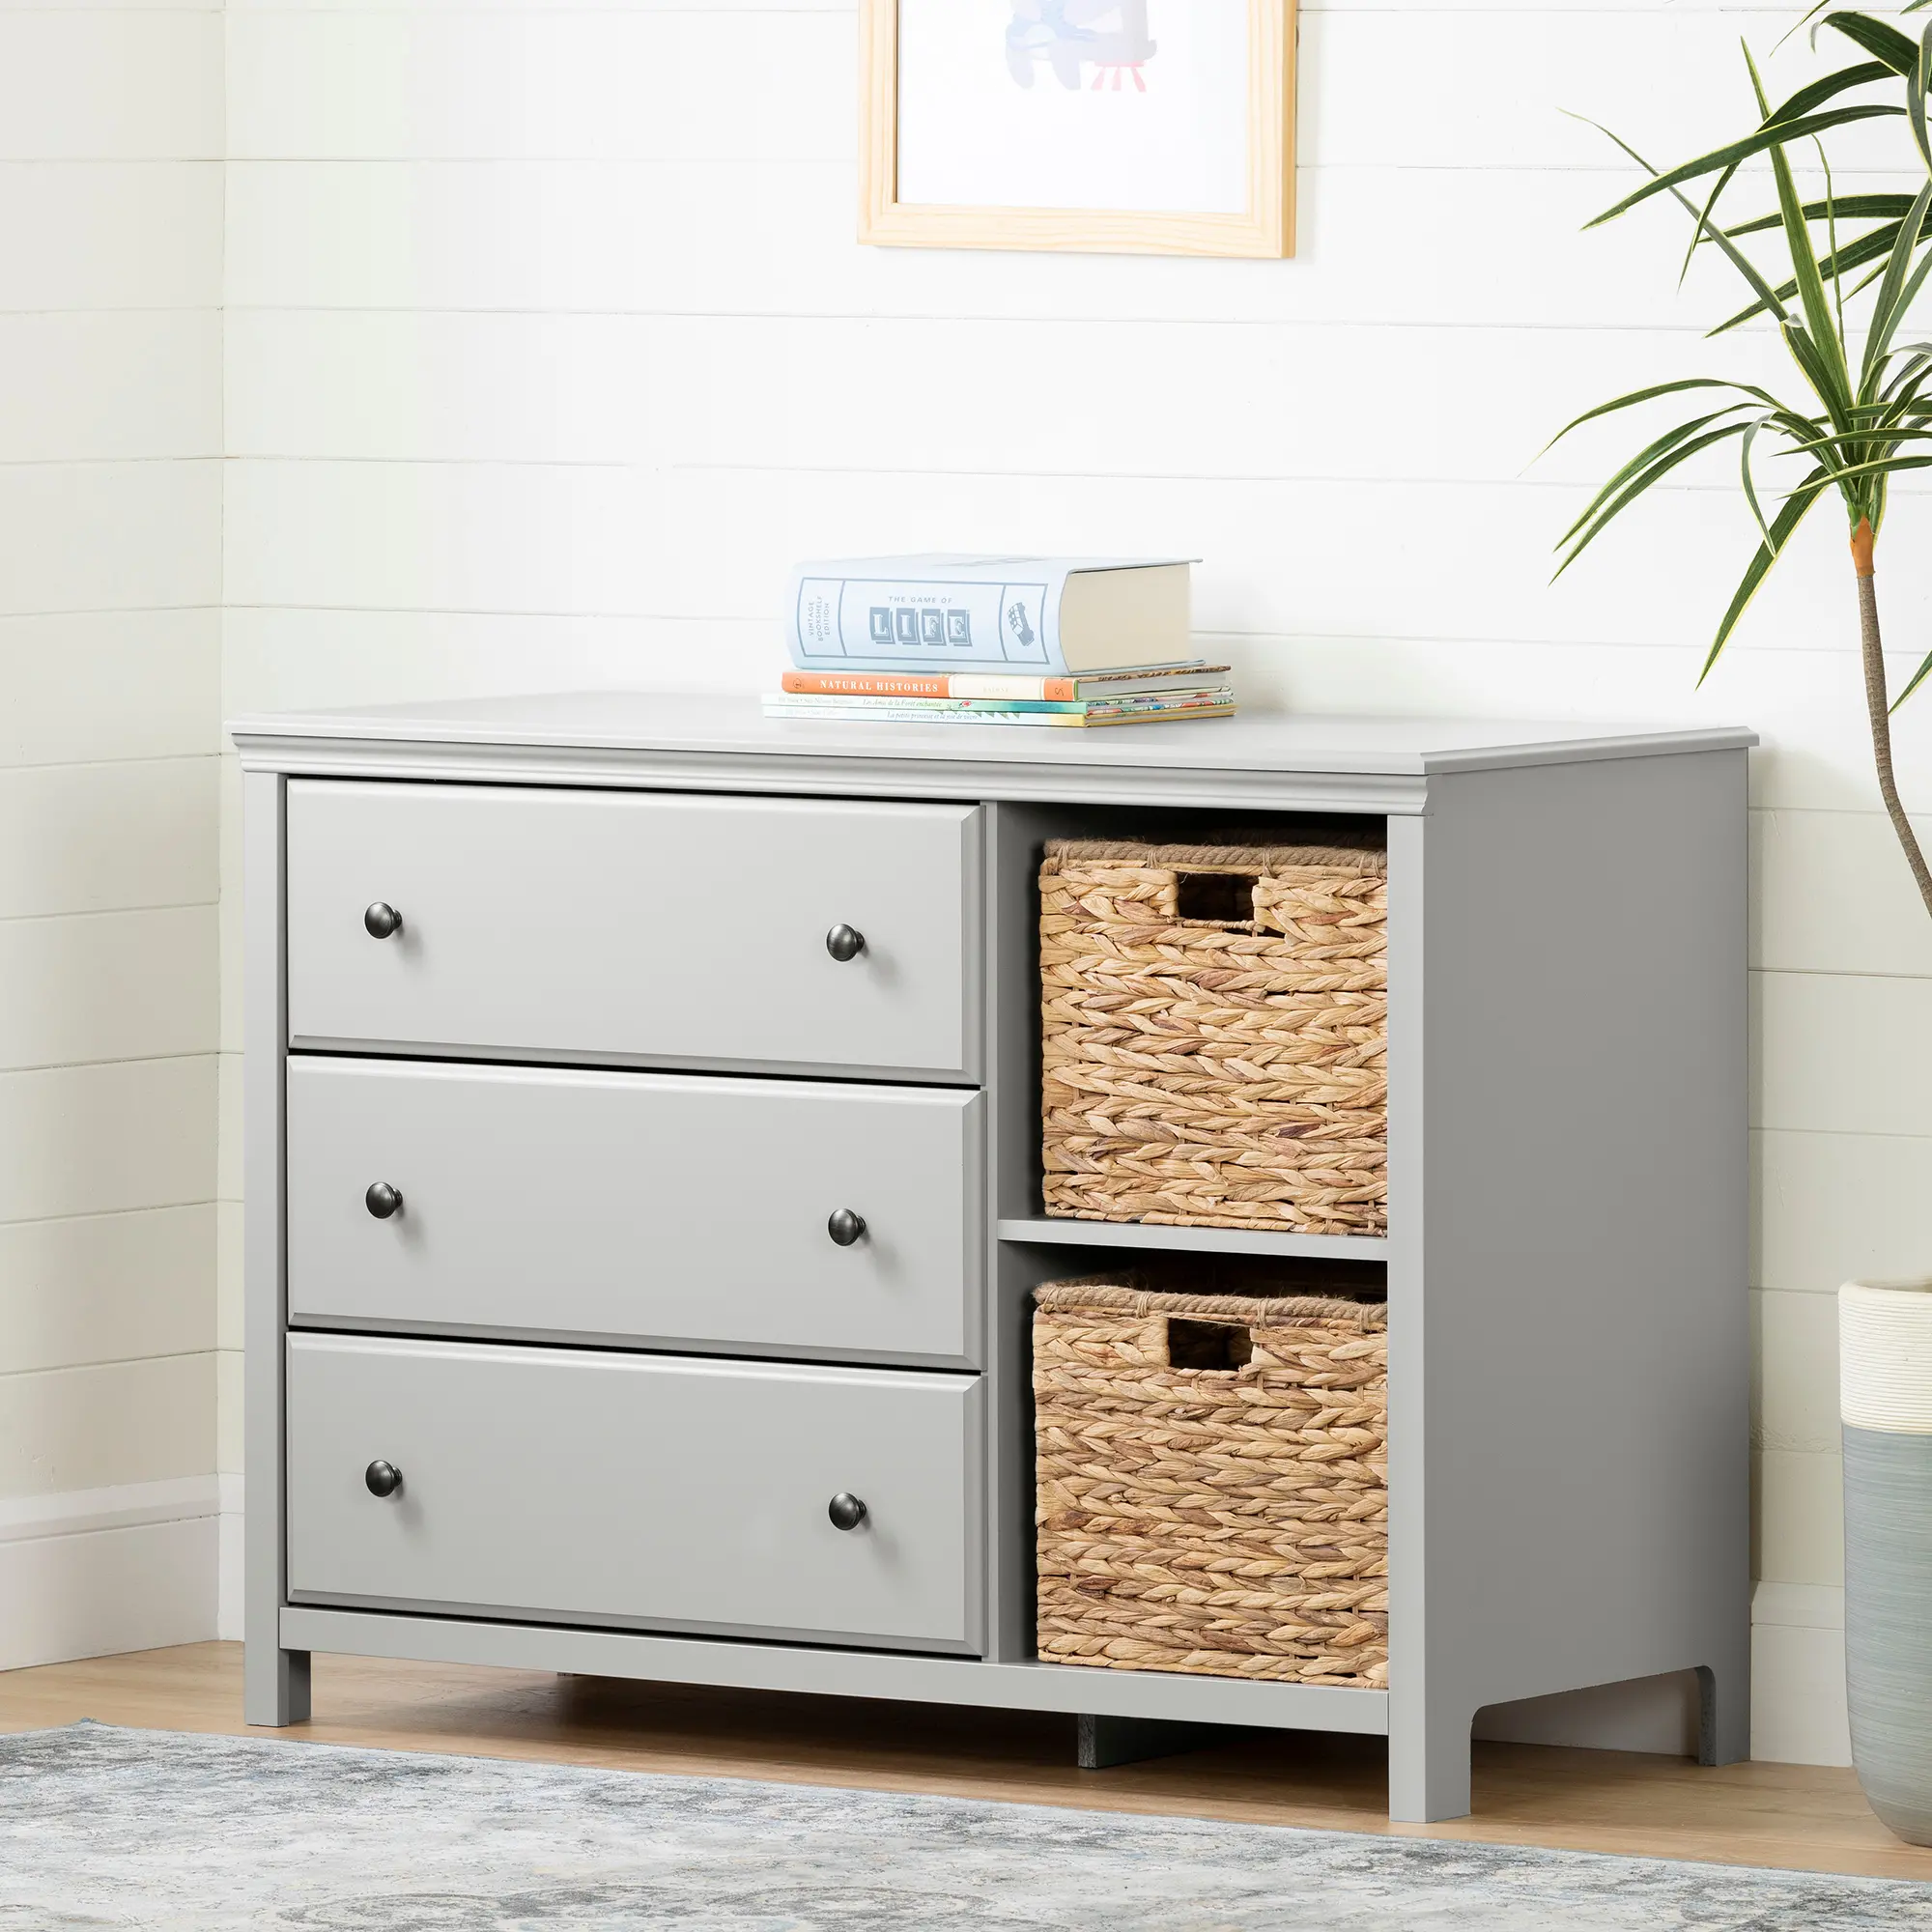 12138 Cotton Candy Gray 3 Drawer Dresser with Baskets -  sku 12138